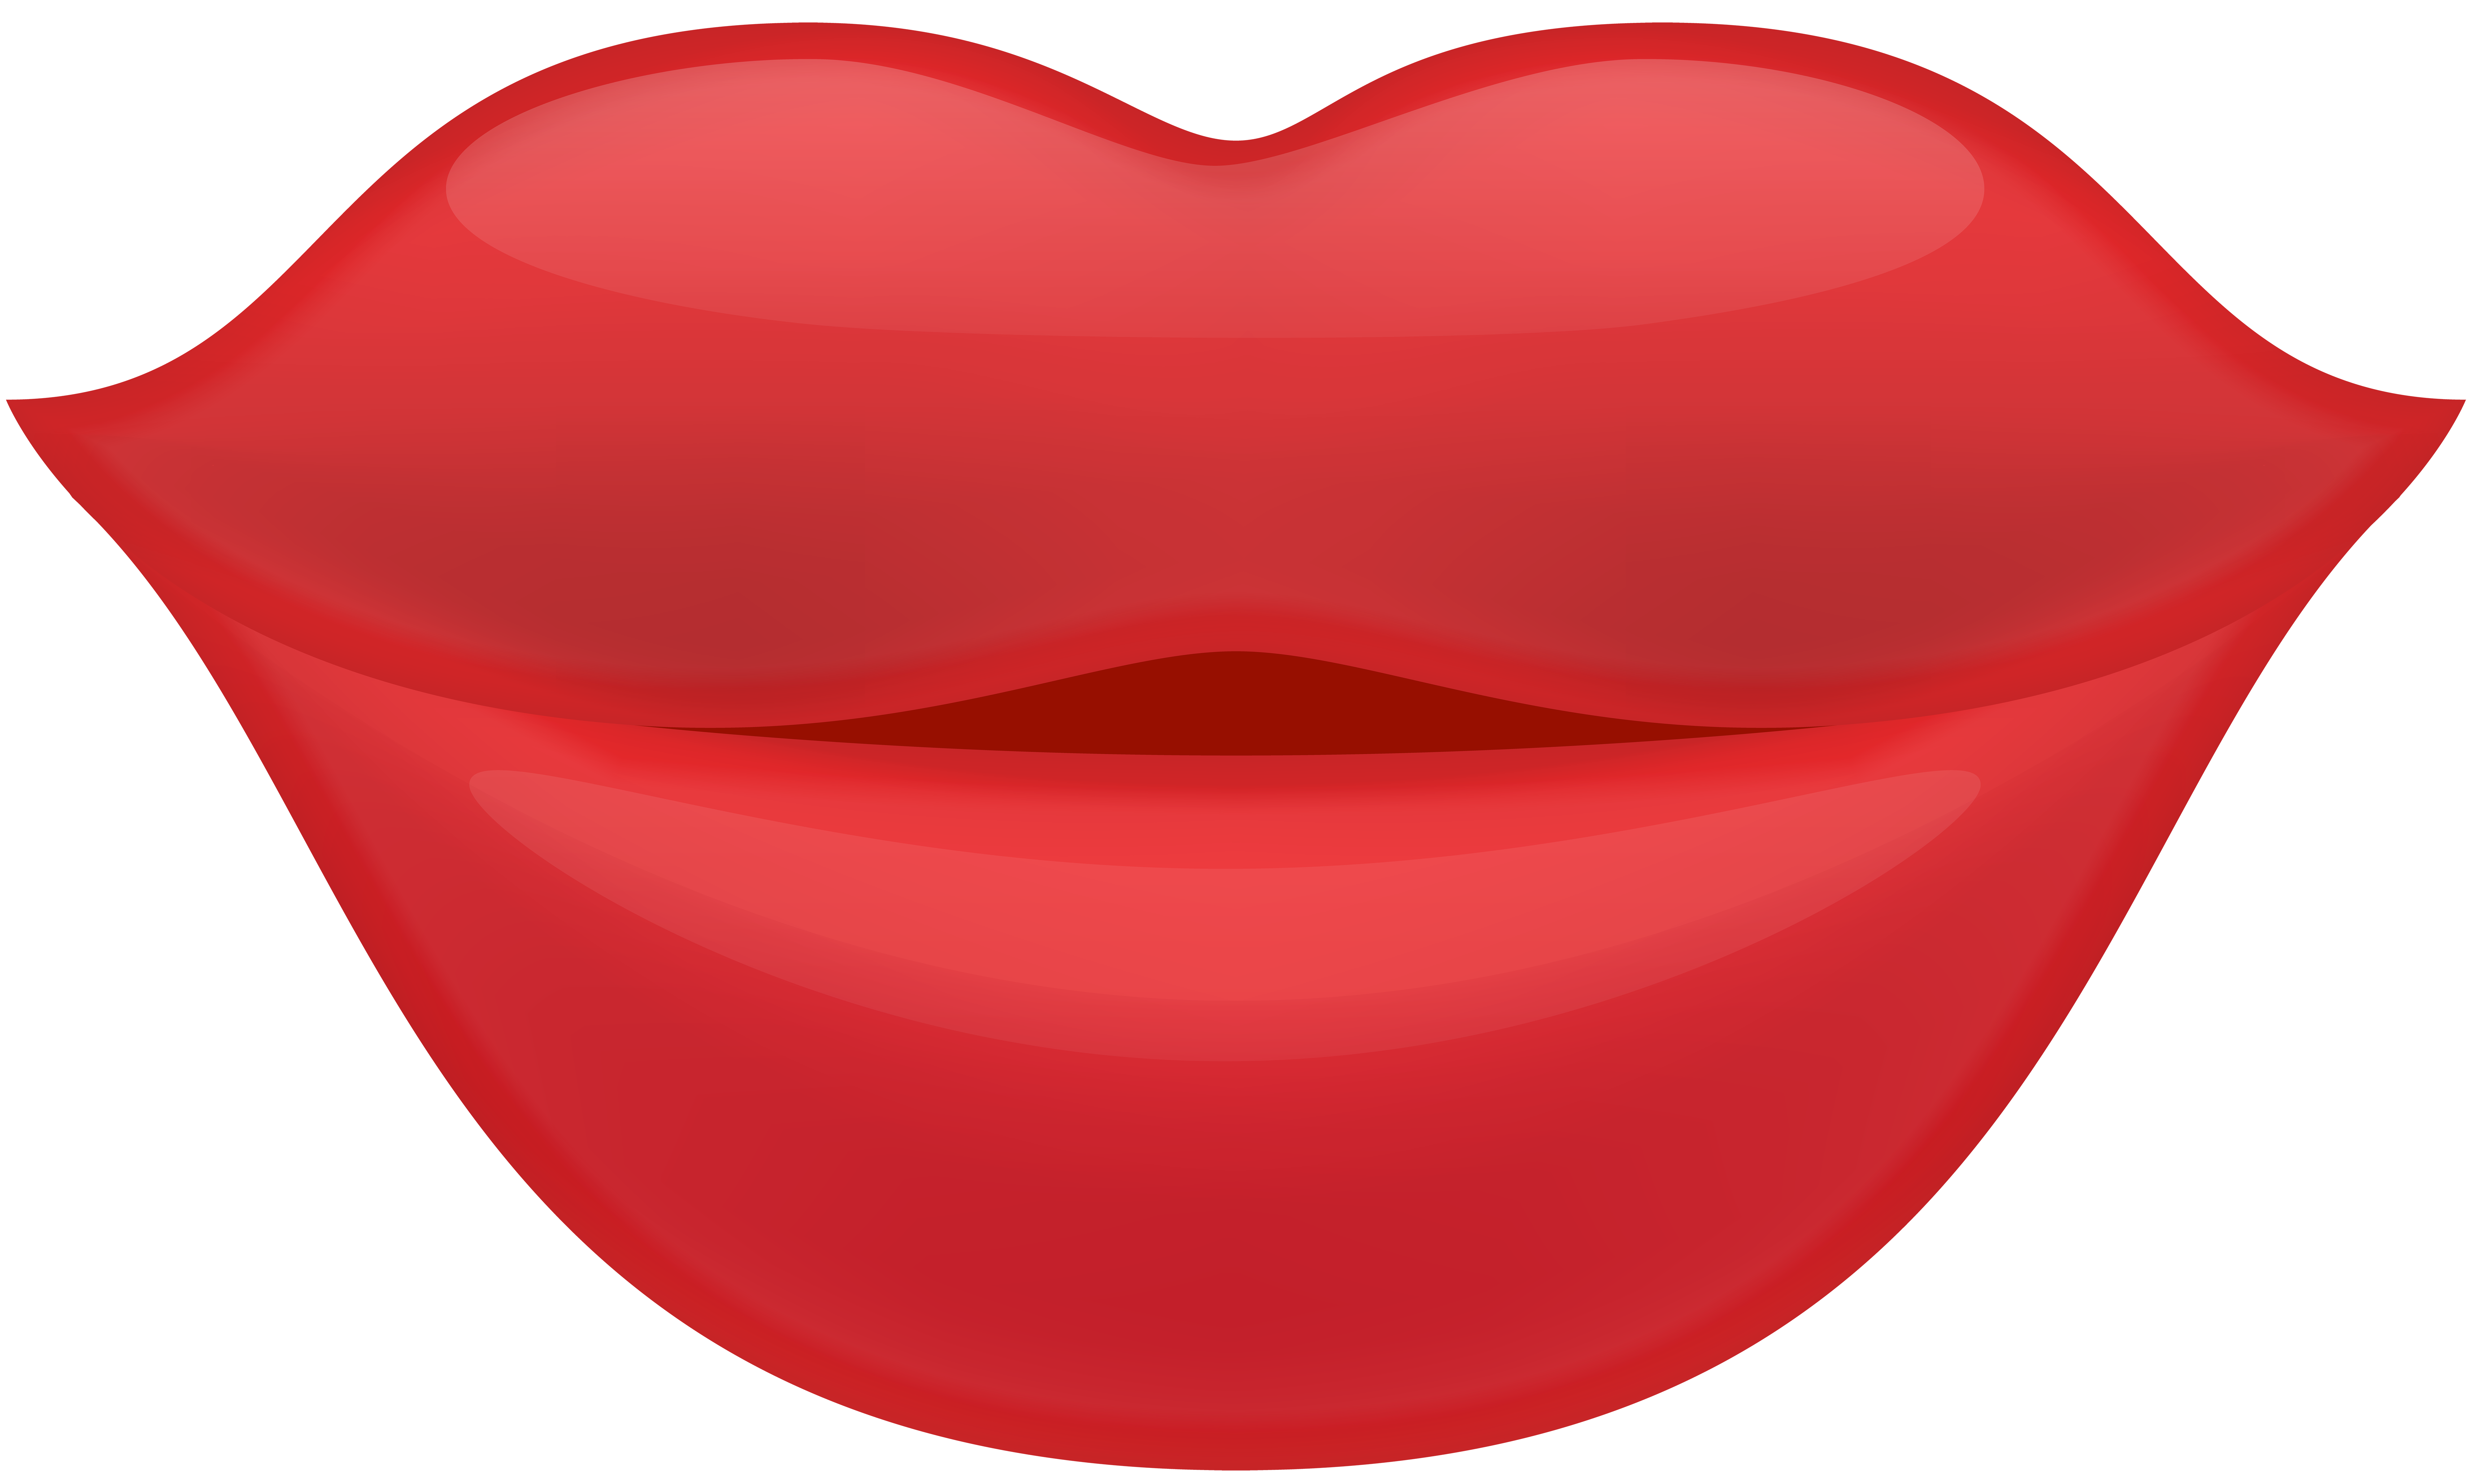 Lips Png This Png Image Was Uploaded On January 6 2017 12 20 Pm By User Musadodemocrata